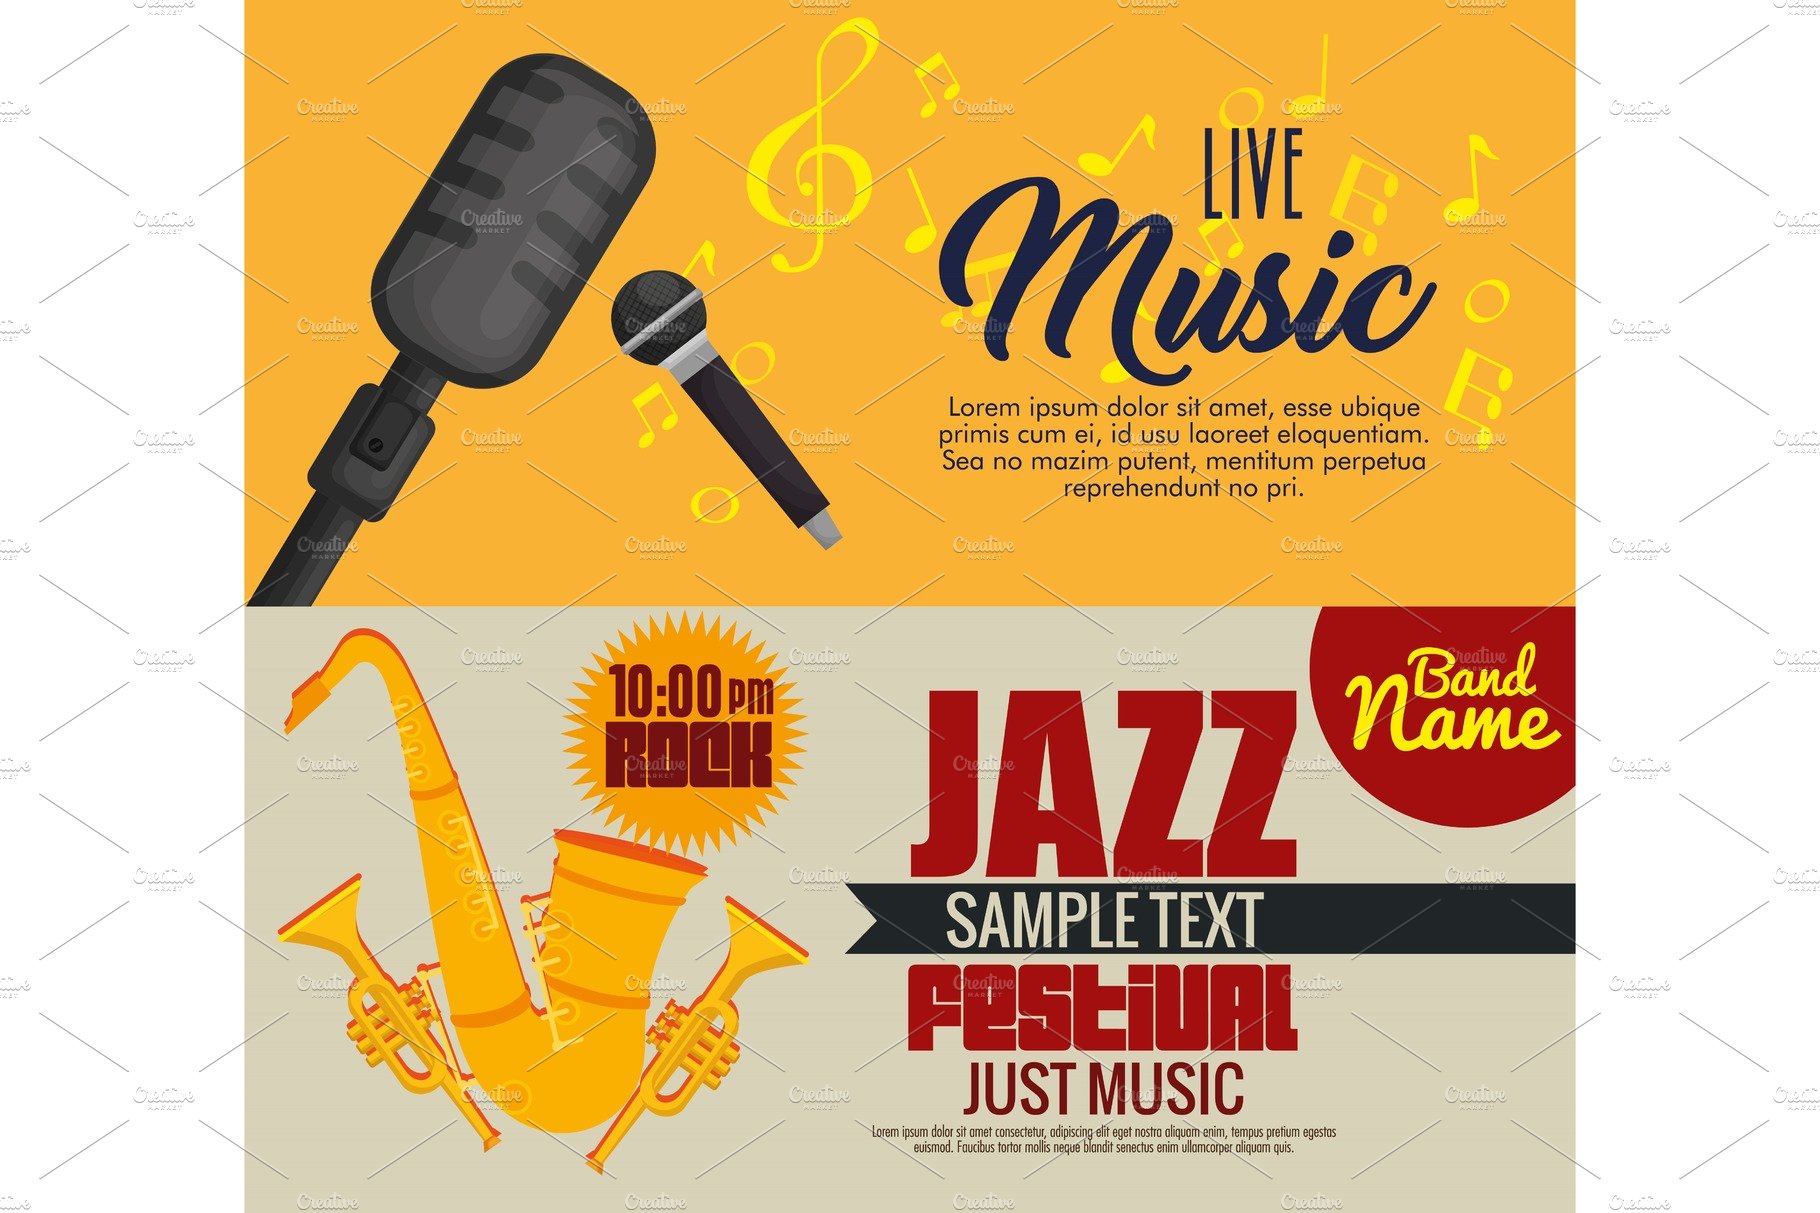 set musical instruments icons cover image.